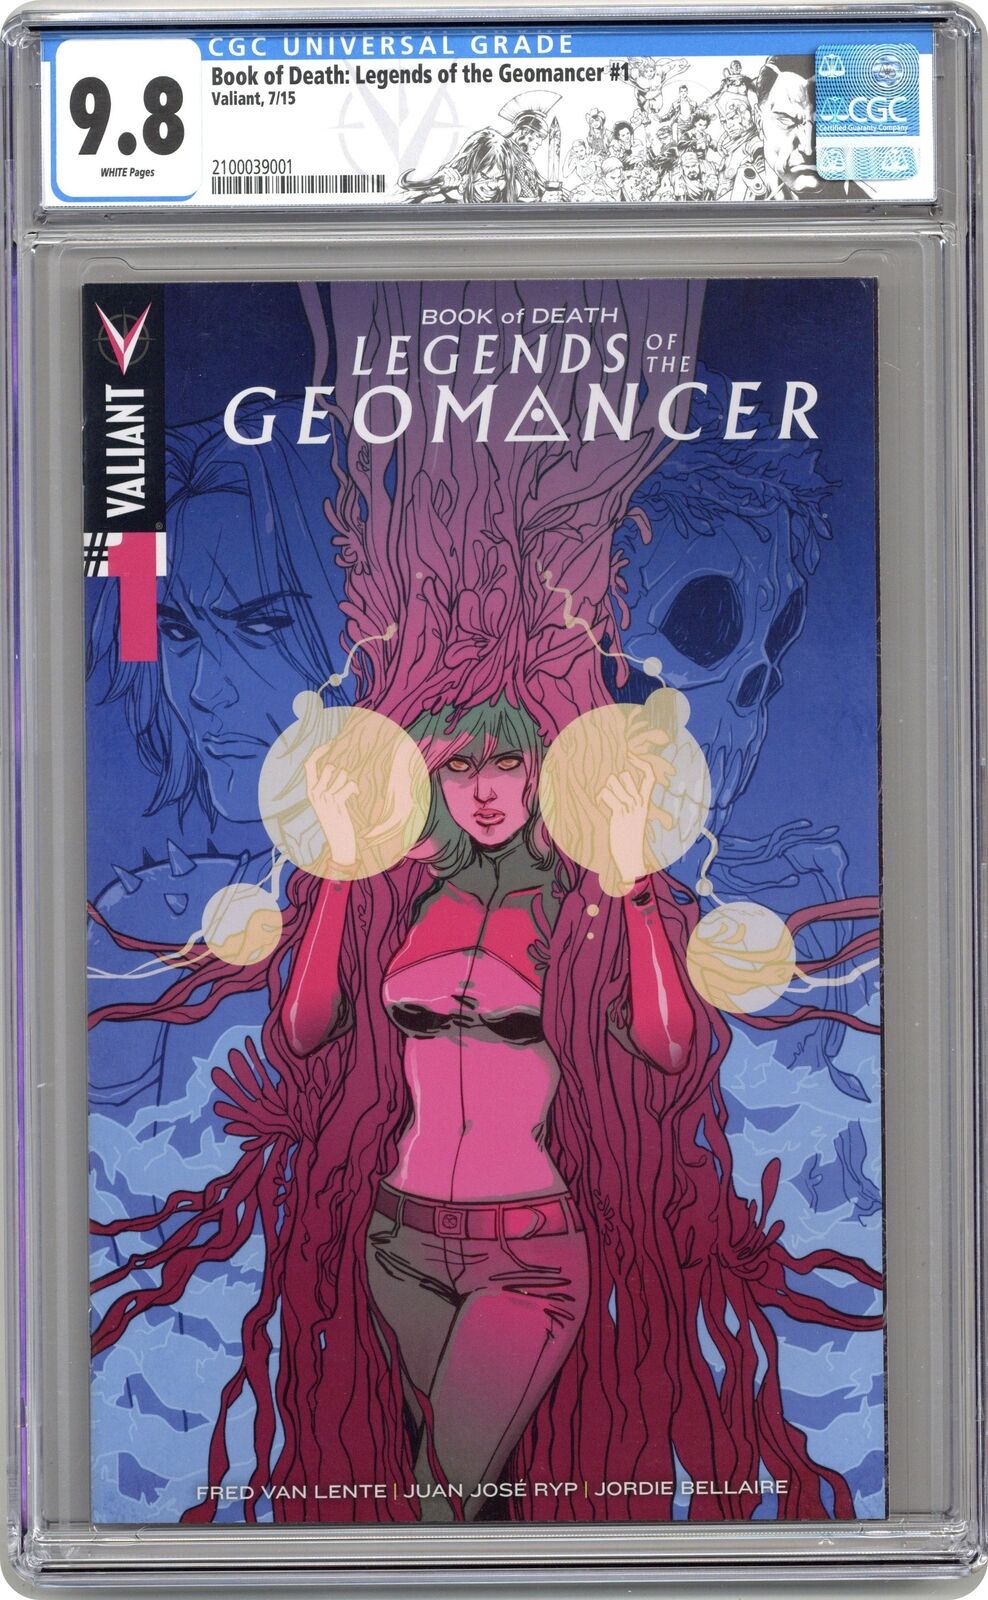 Book of Death Legends of the Geomancer #1 CGC 9.8 2015 2100039001